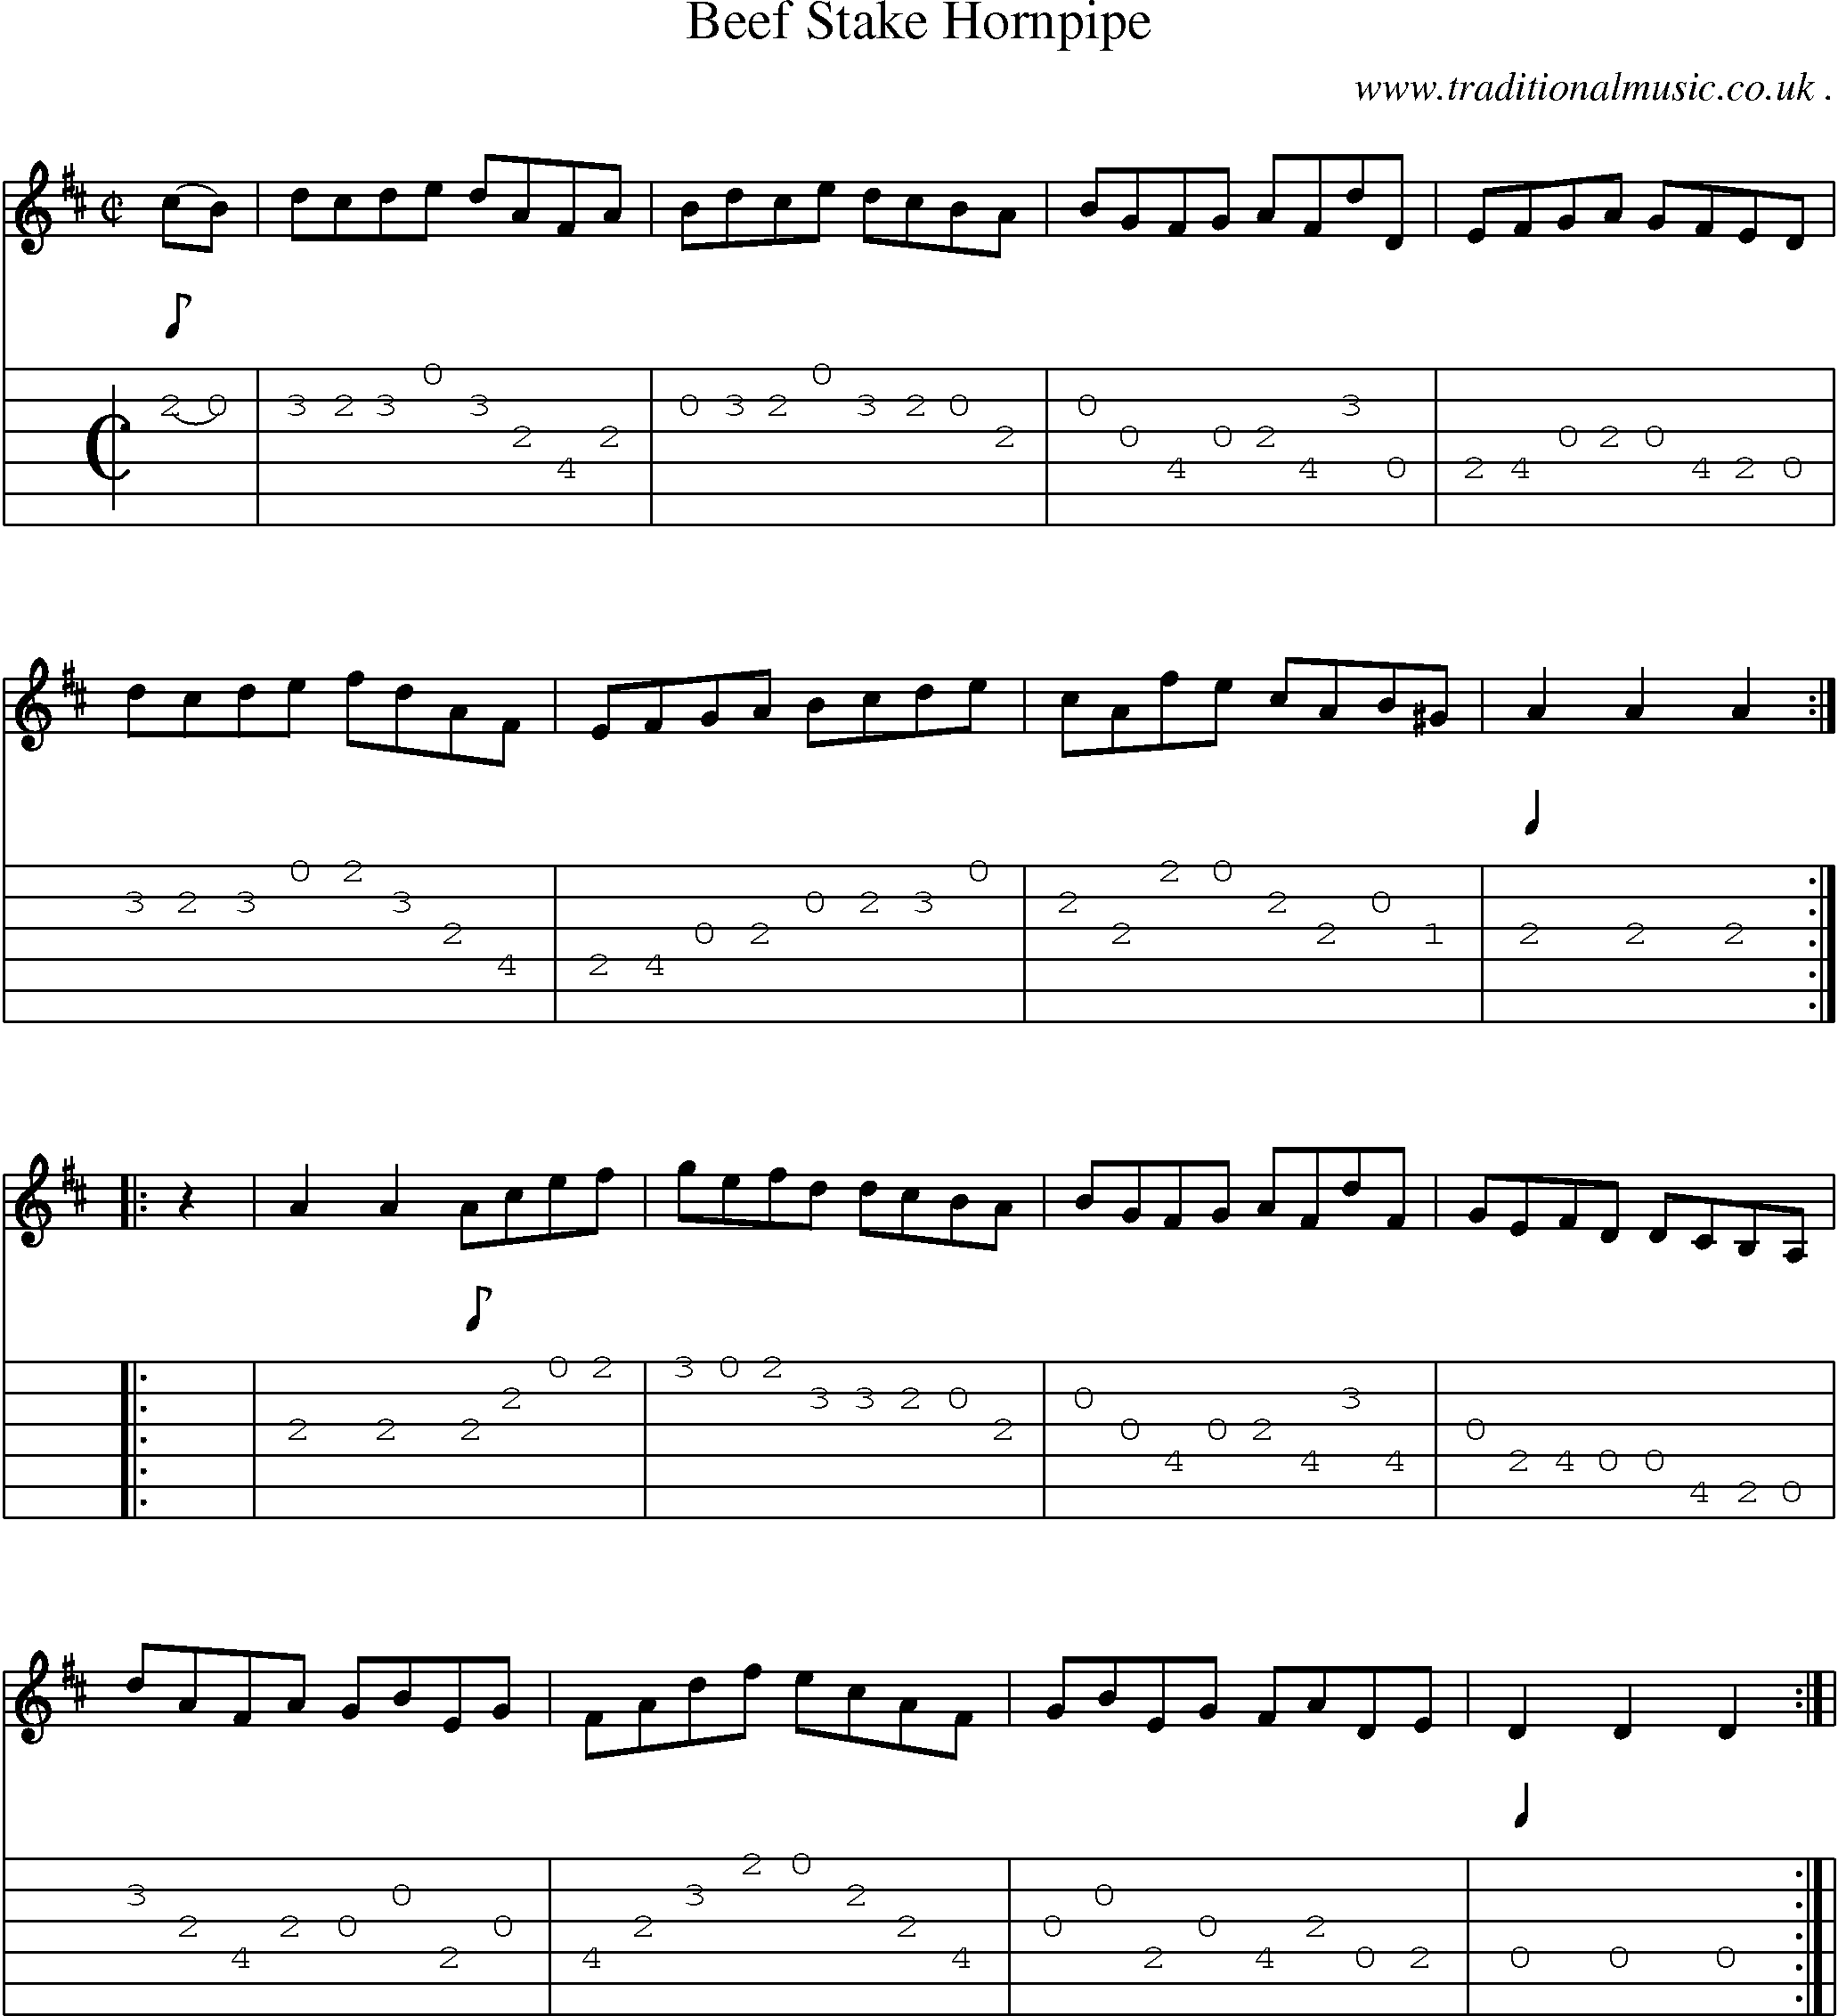 Sheet-Music and Guitar Tabs for Beef Stake Hornpipe